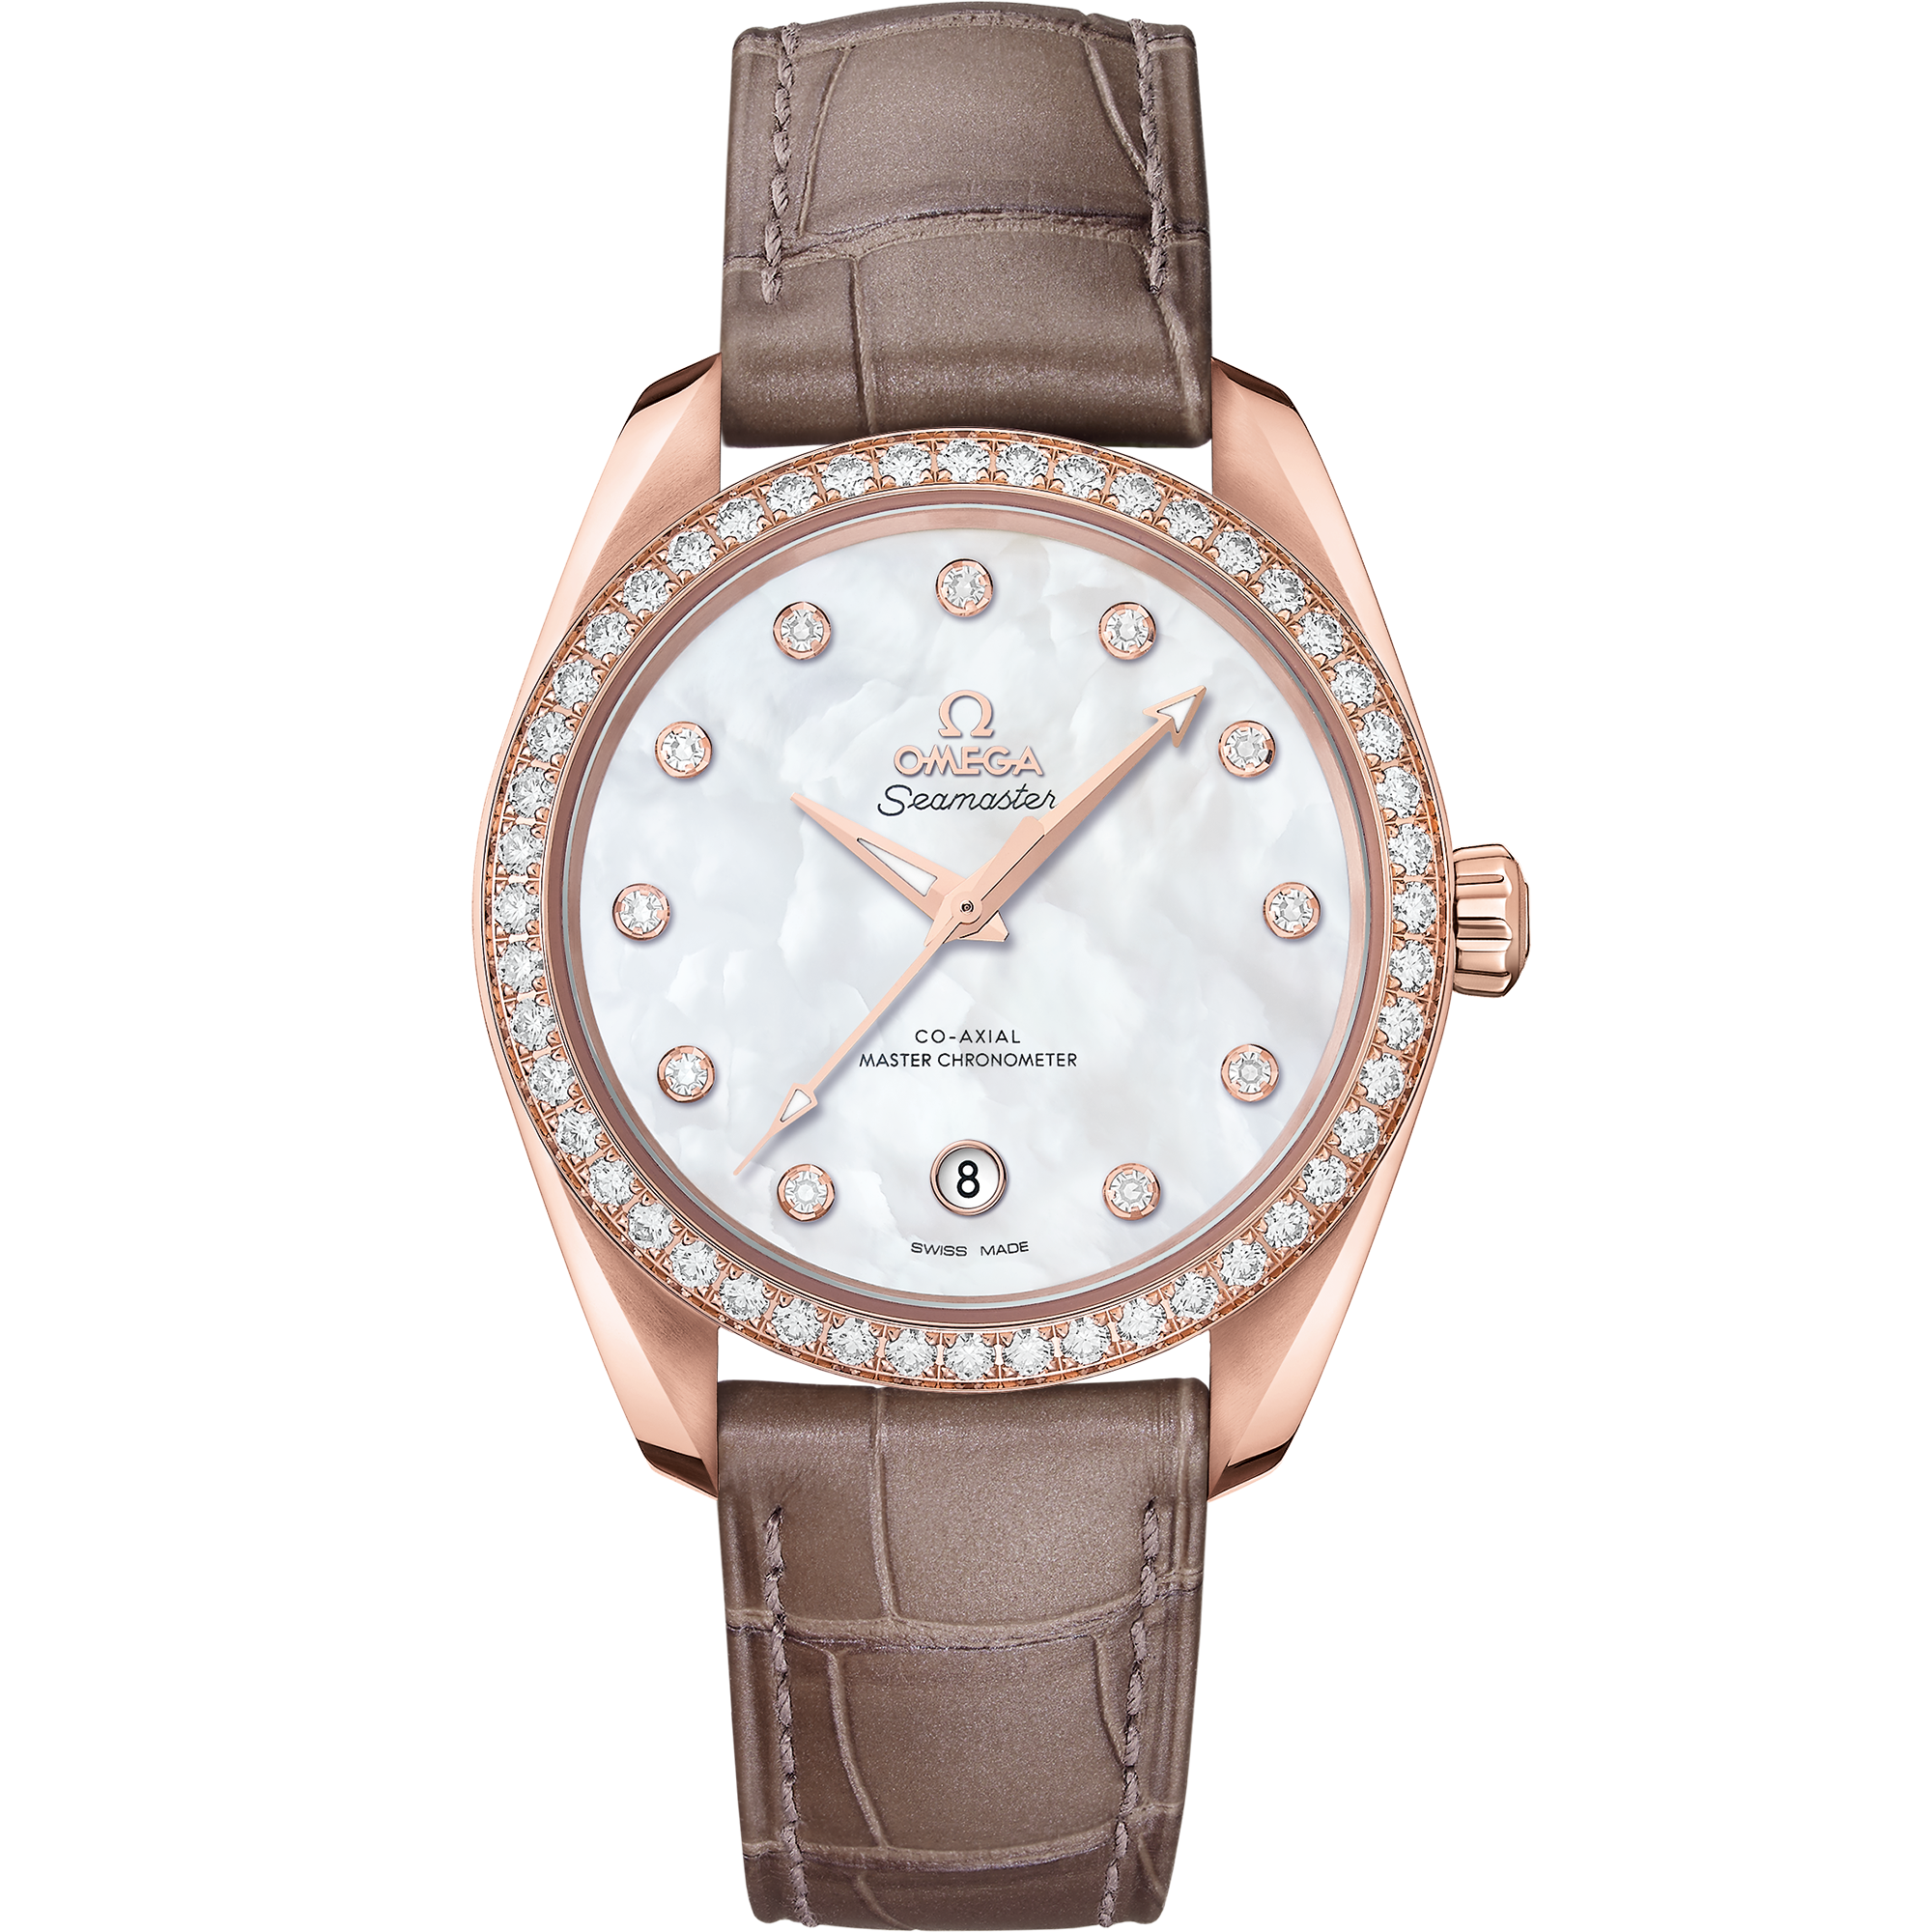 Seamaster 38 mm, Sedna™ gold on leather strap - 220.58.38.20.55.001